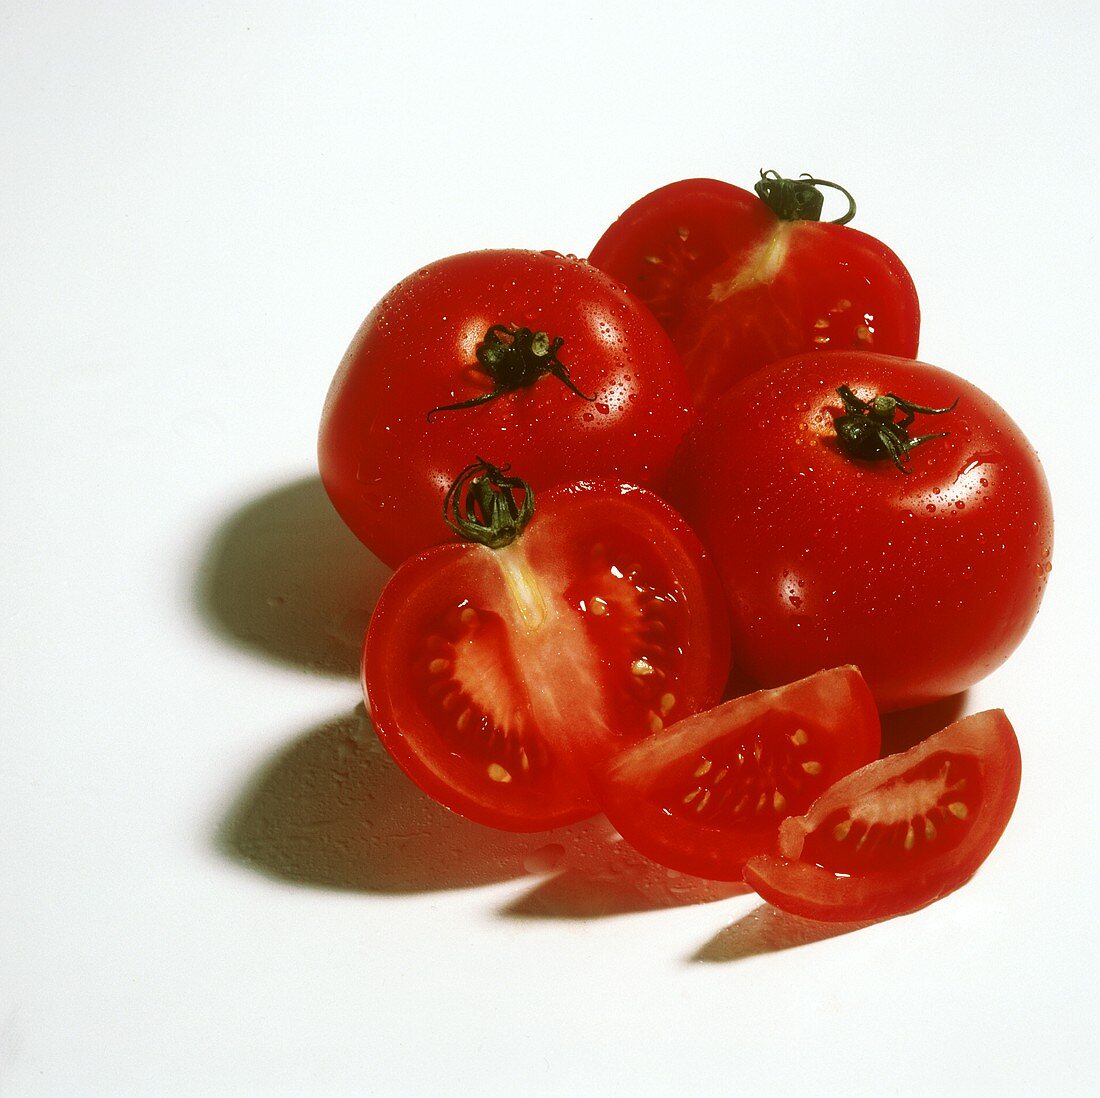 Tomatoes with drops of water, one cut into